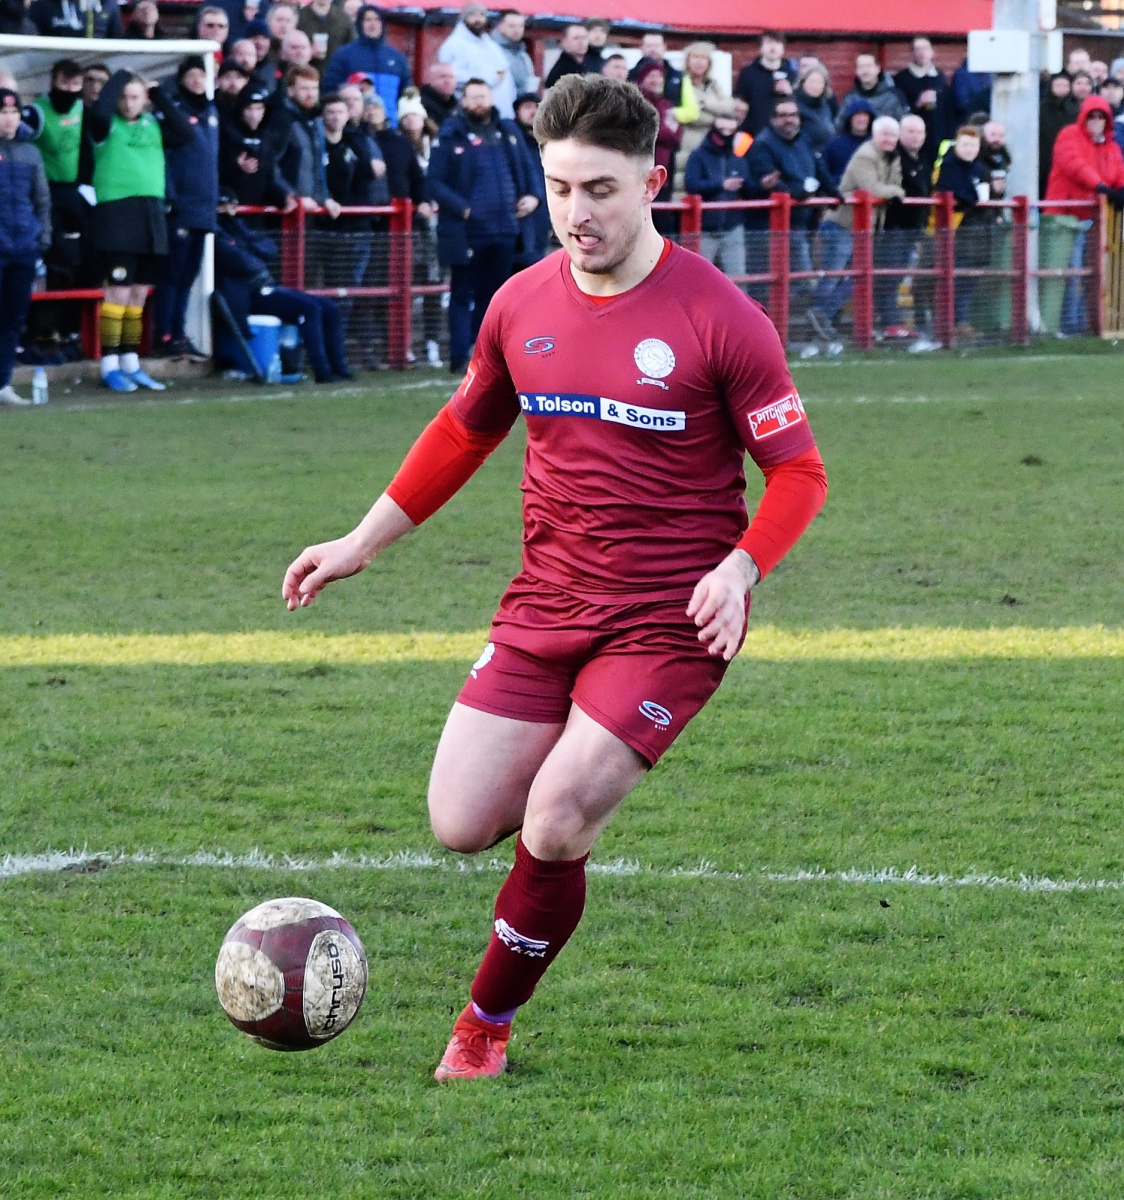 The-late-introduction-of-Dav-Symingtin-created-chances-for-the-Reds-but-no-goals-Ben-Challis